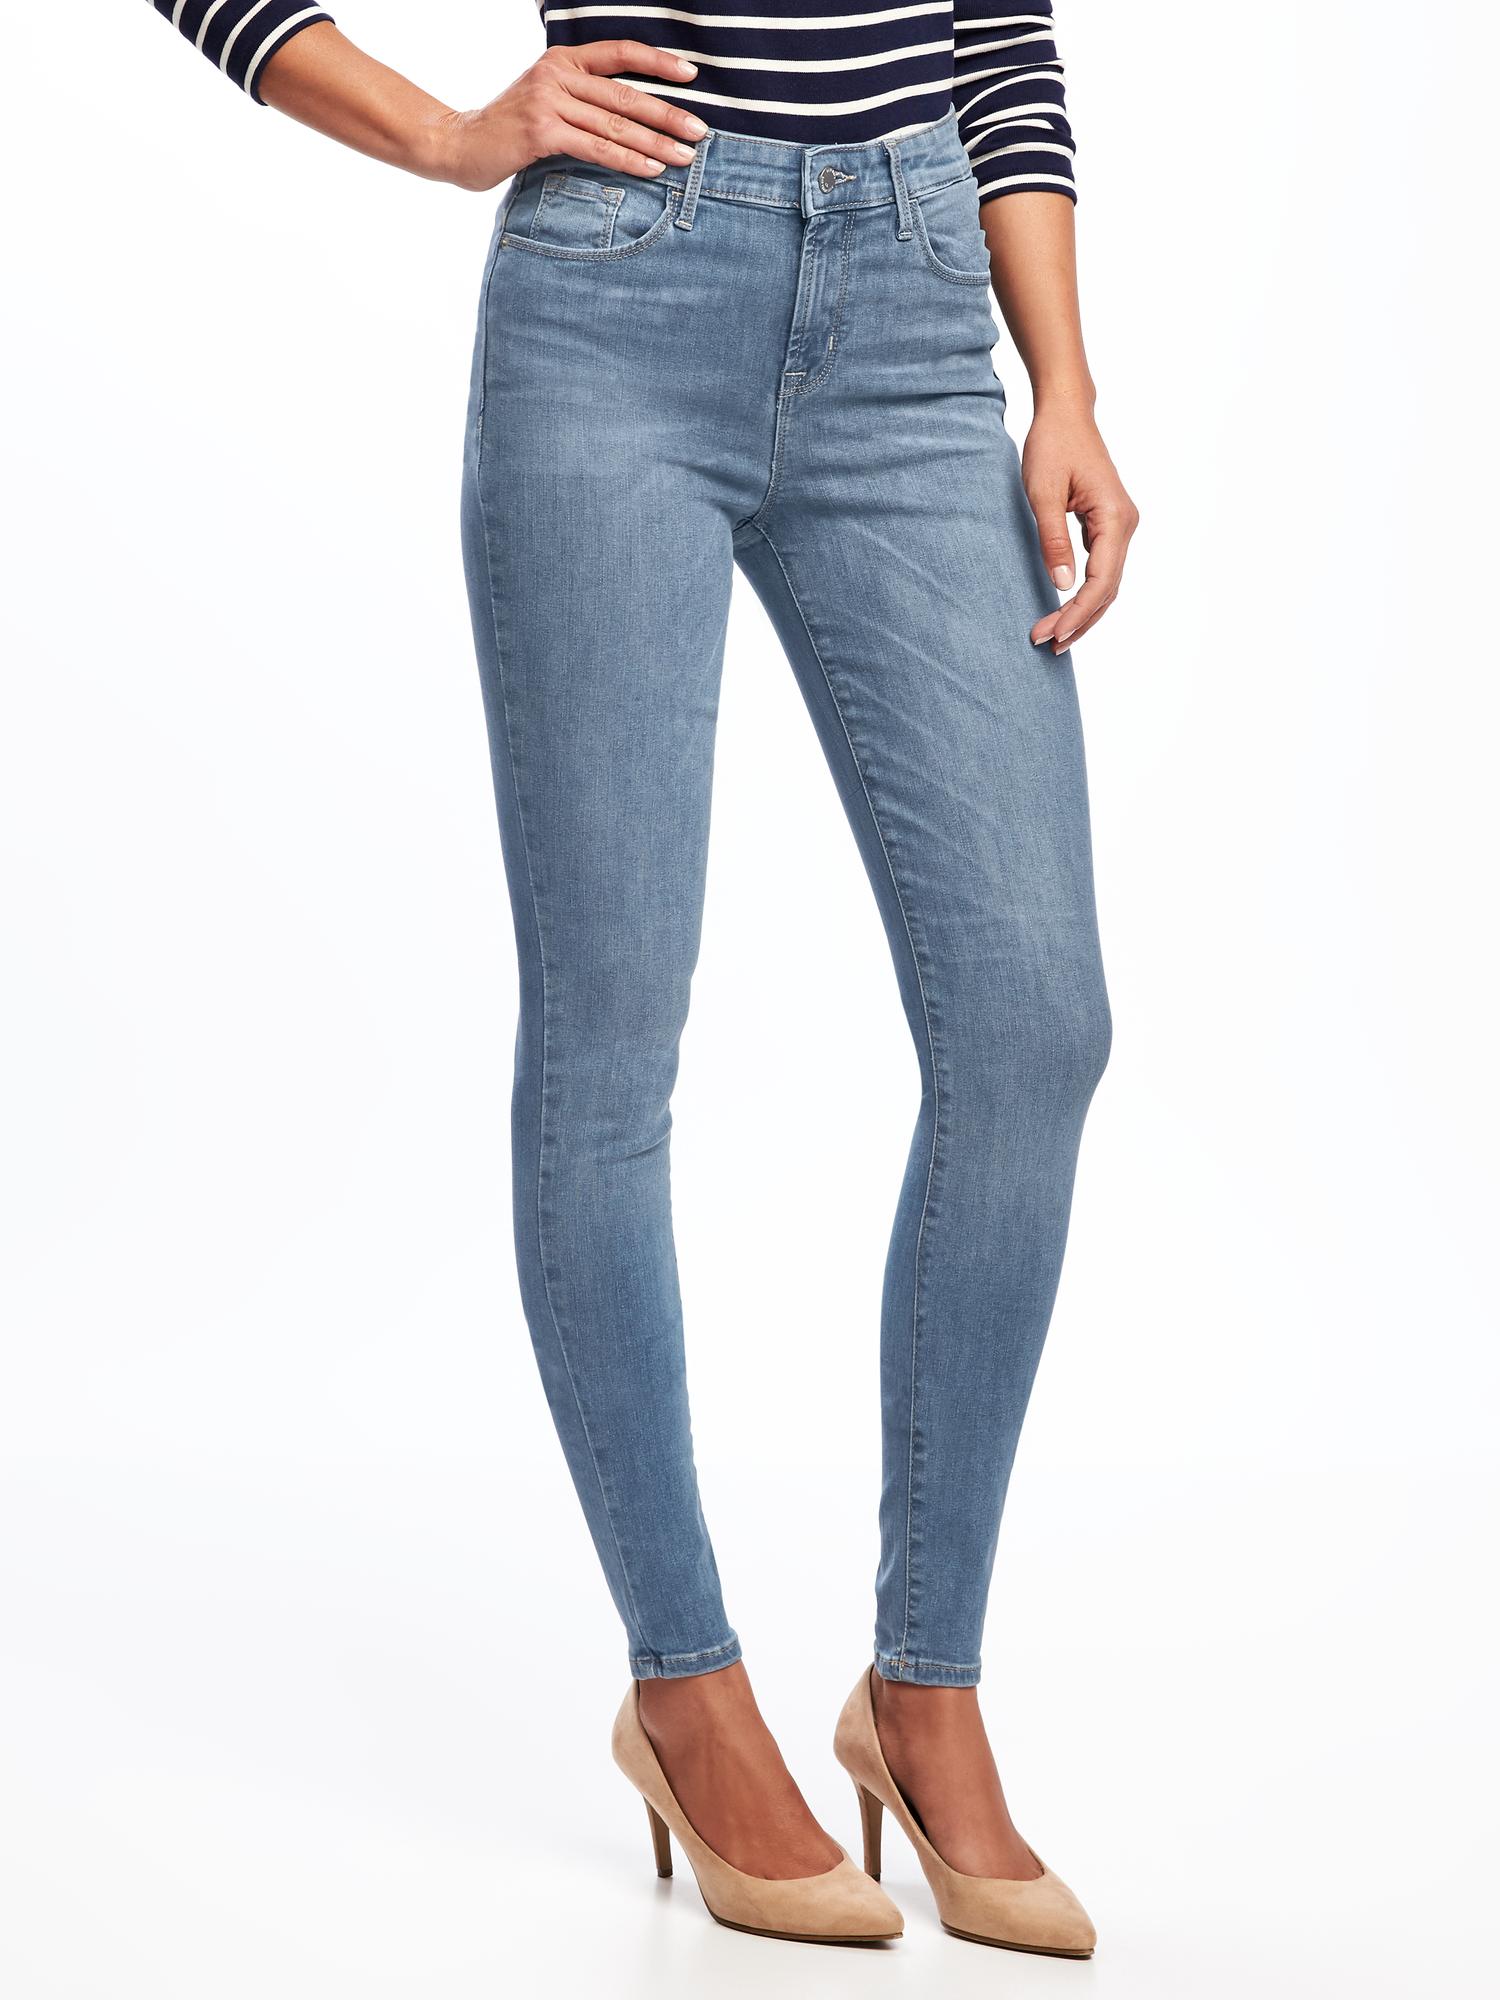 old navy rockstar jeans high rise